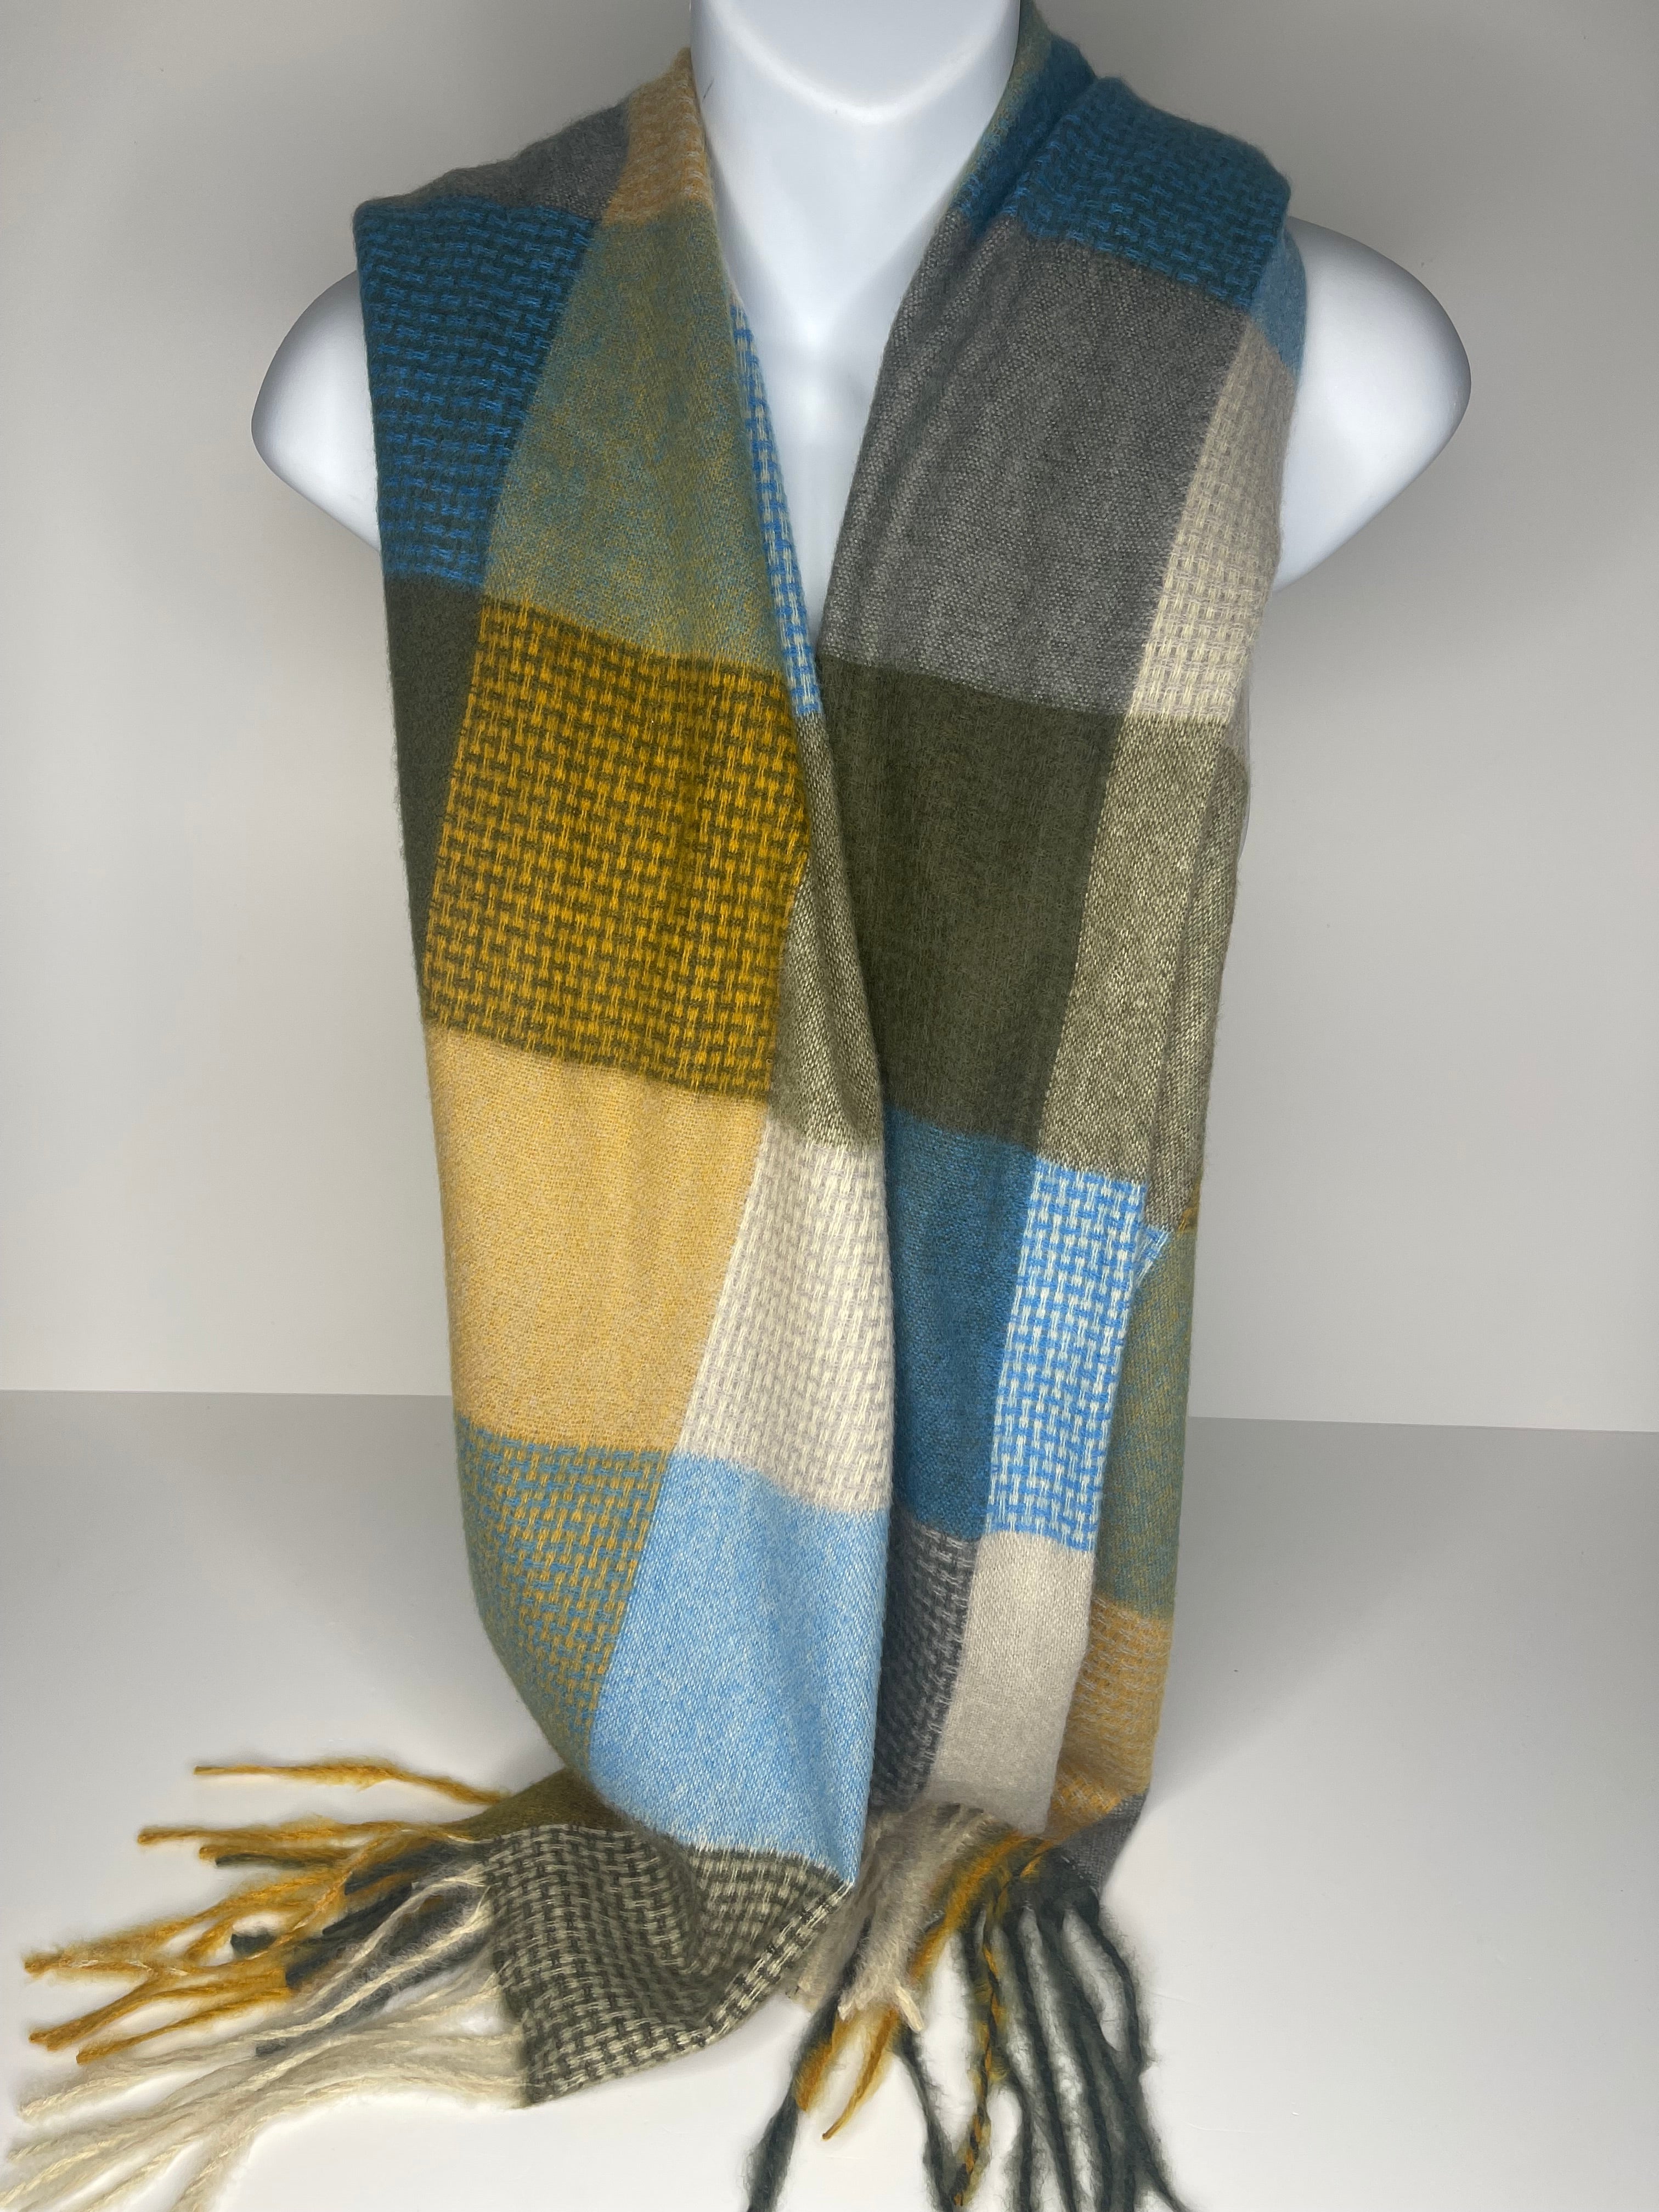 Winter weight, woven textured checkered print scarf in shades of mustard, khaki, grey and blue